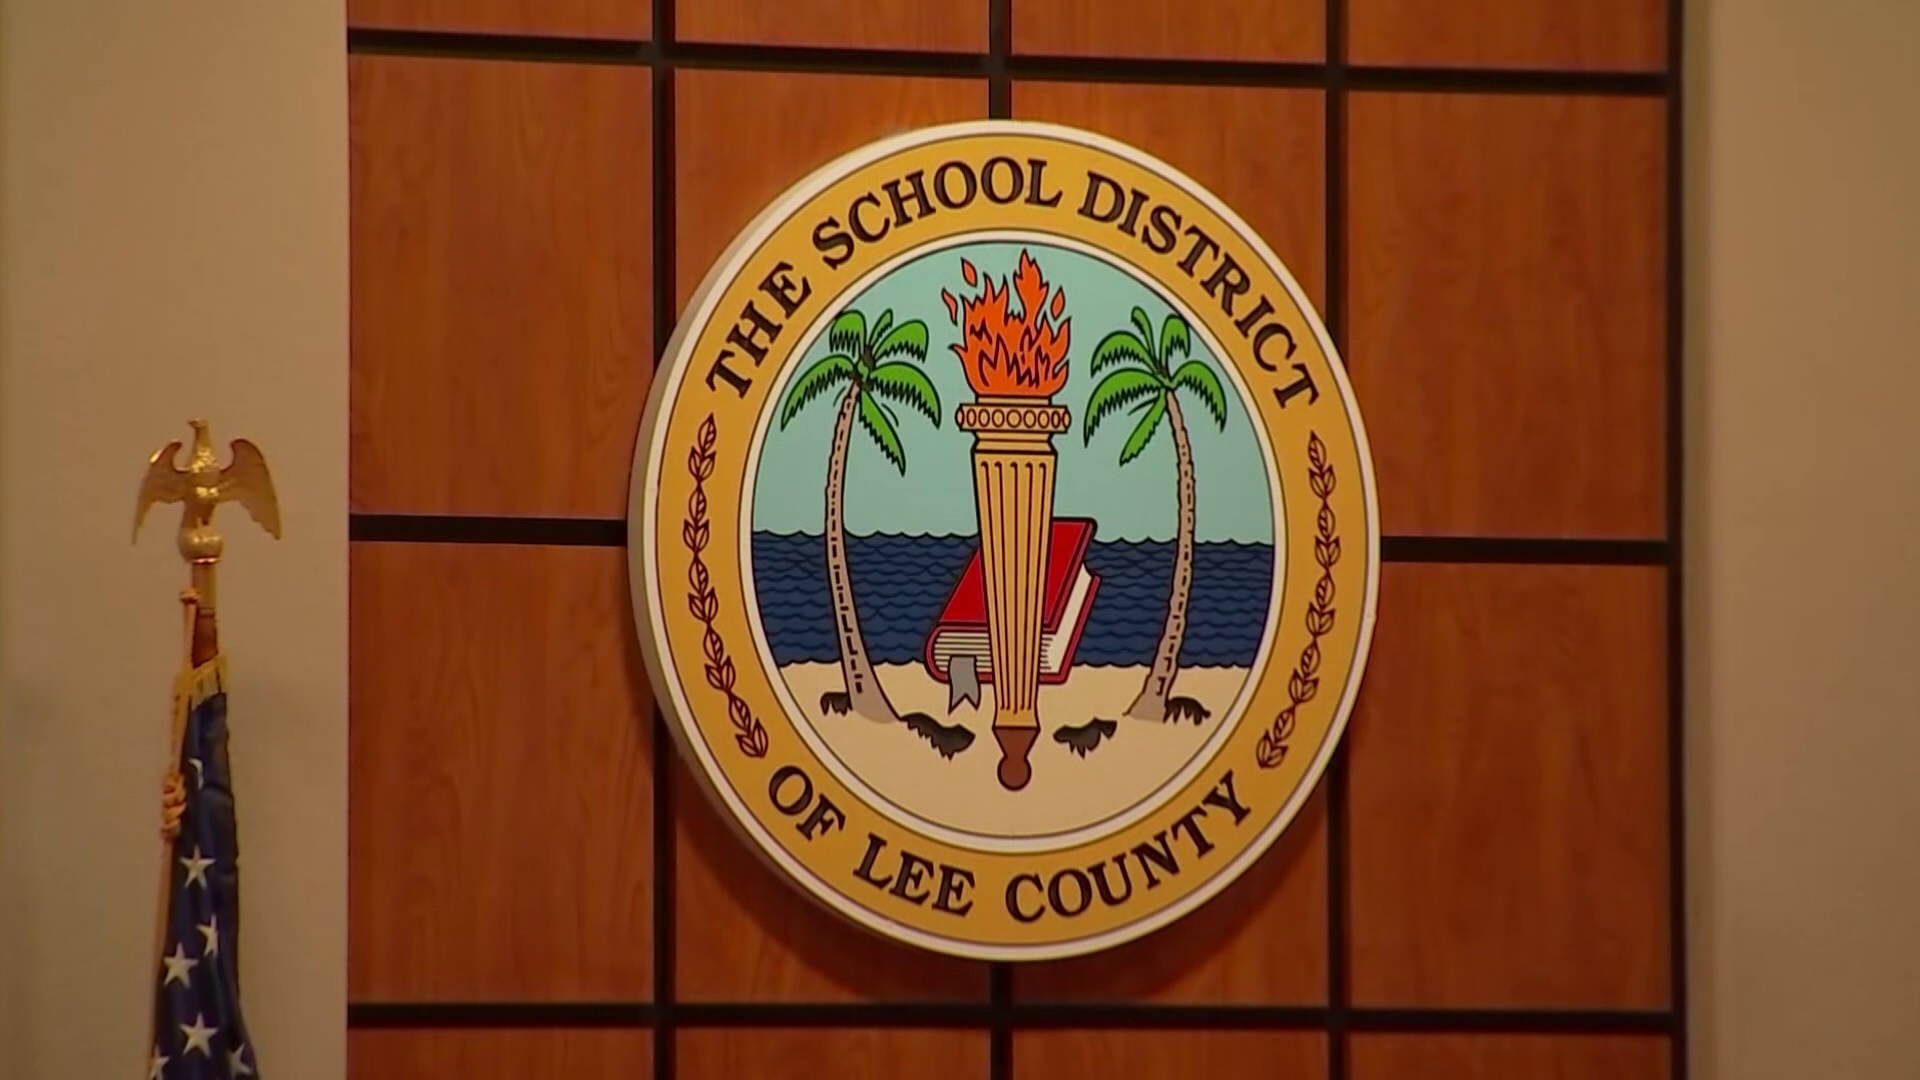 Lee County schools announce tentative reopening plan